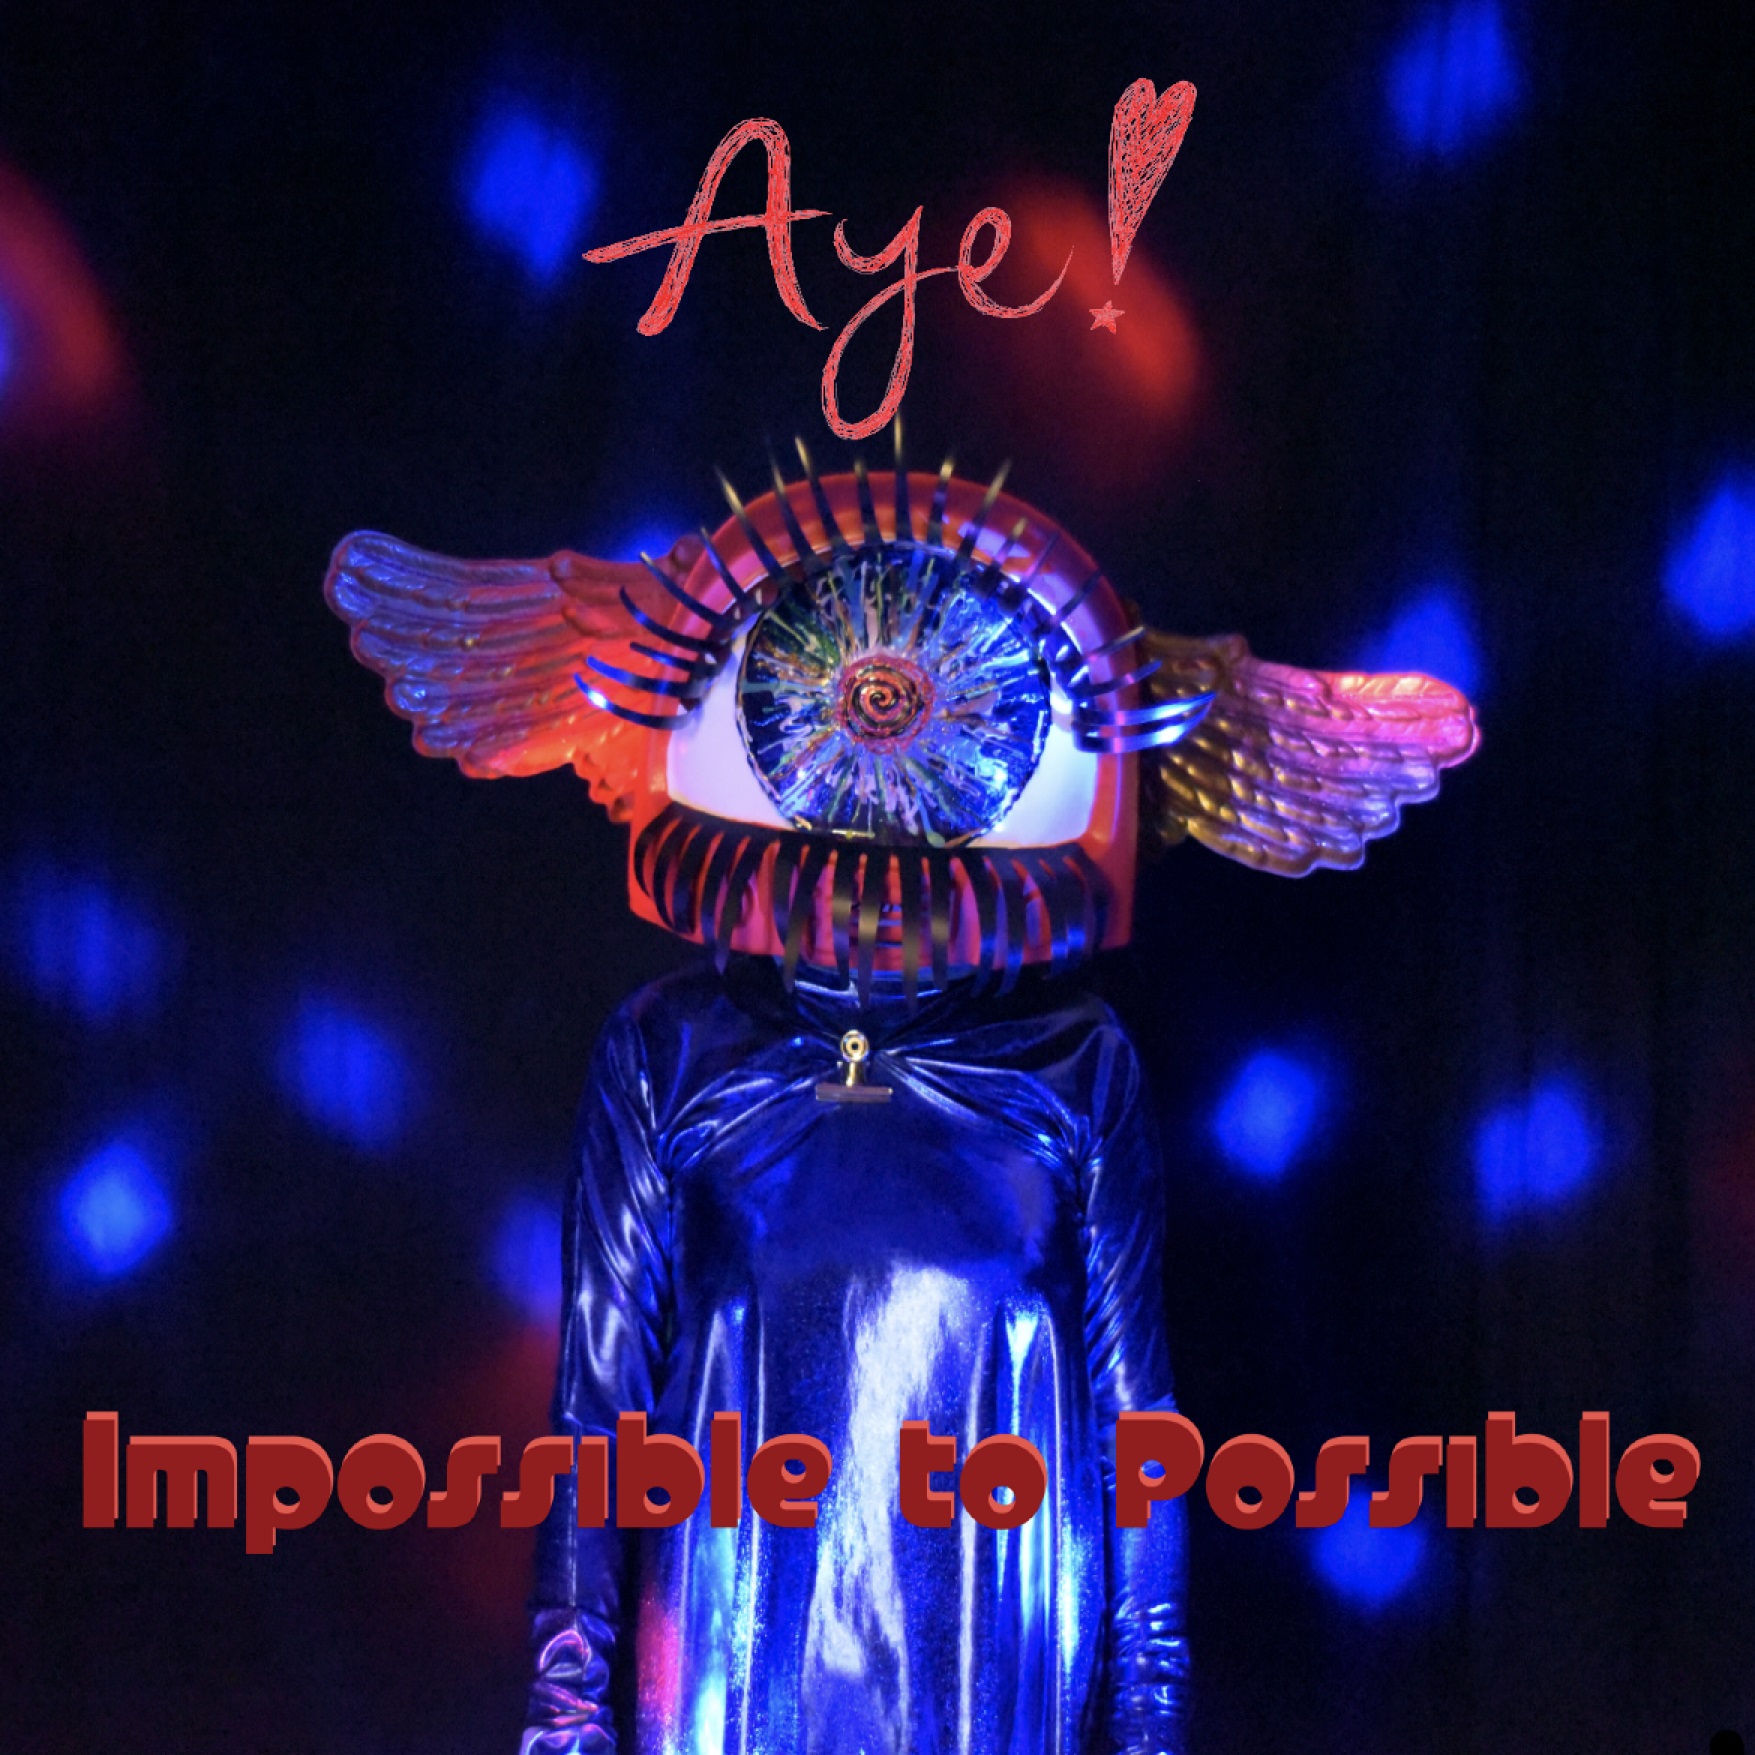 VIDEO PREMIERE: Aye! (Pronounced 'I') - Impossible to Possible 